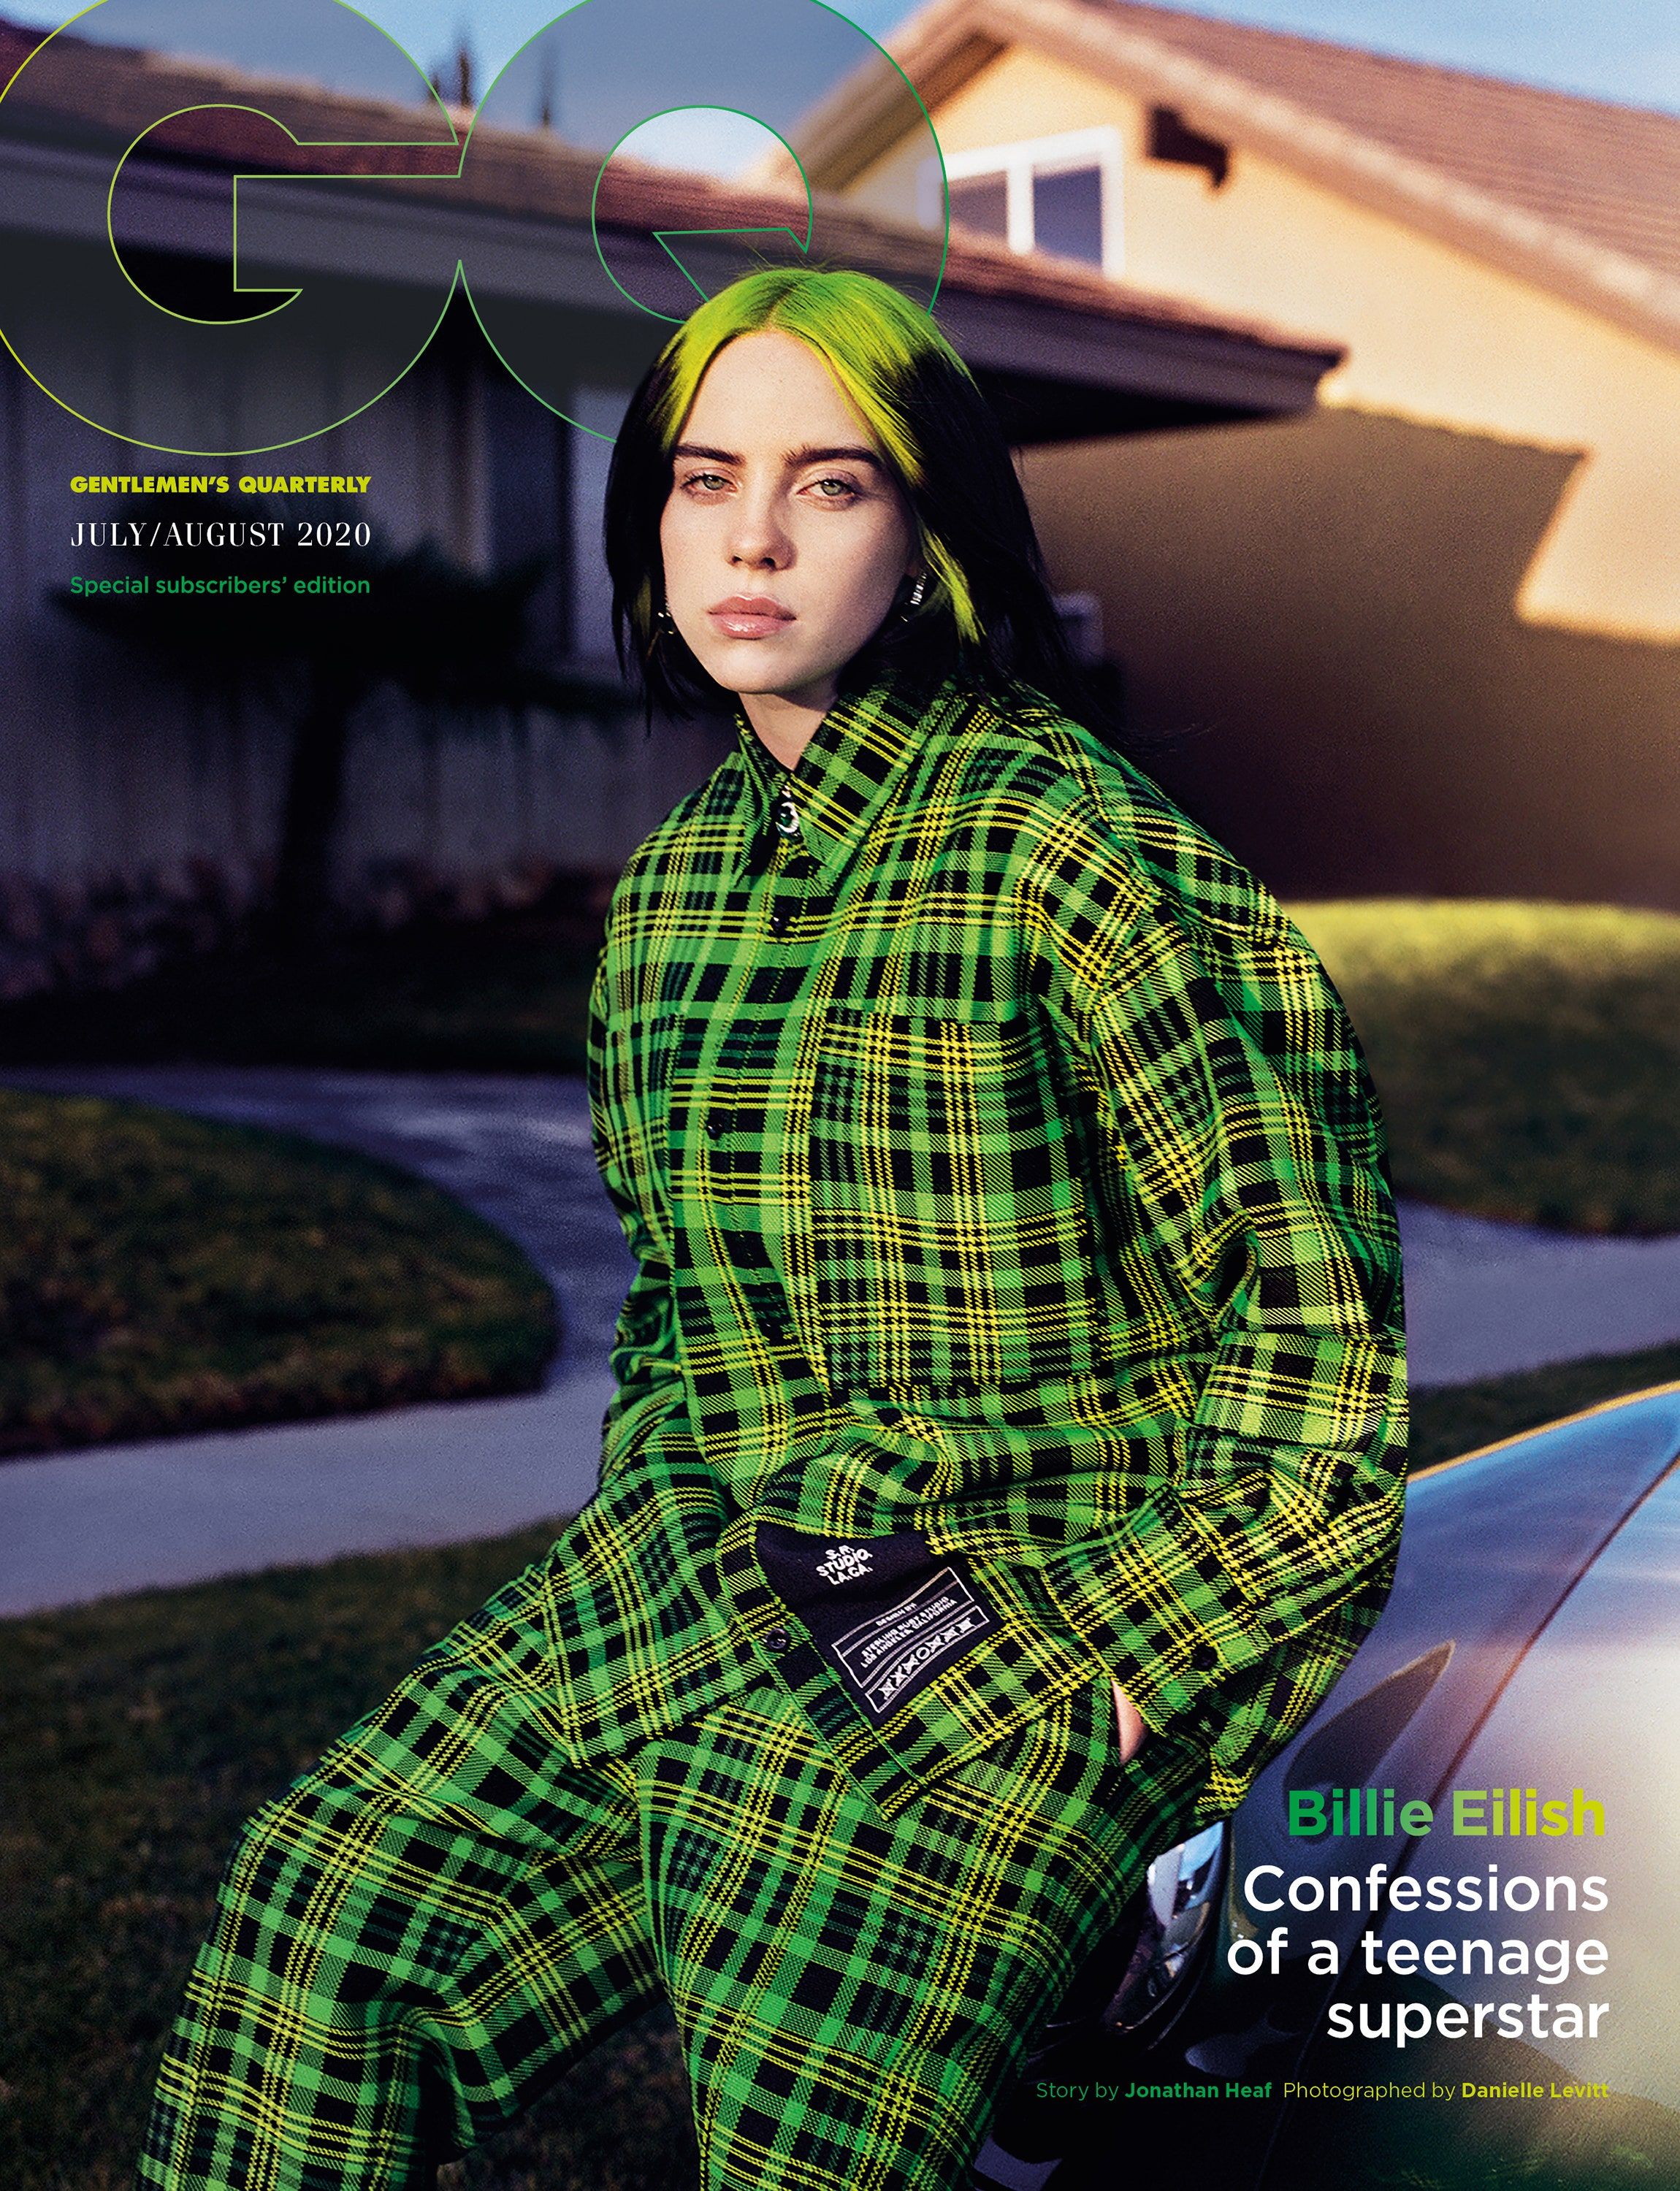 Billie Eilish: “Sometimes I feel trapped by this persona”